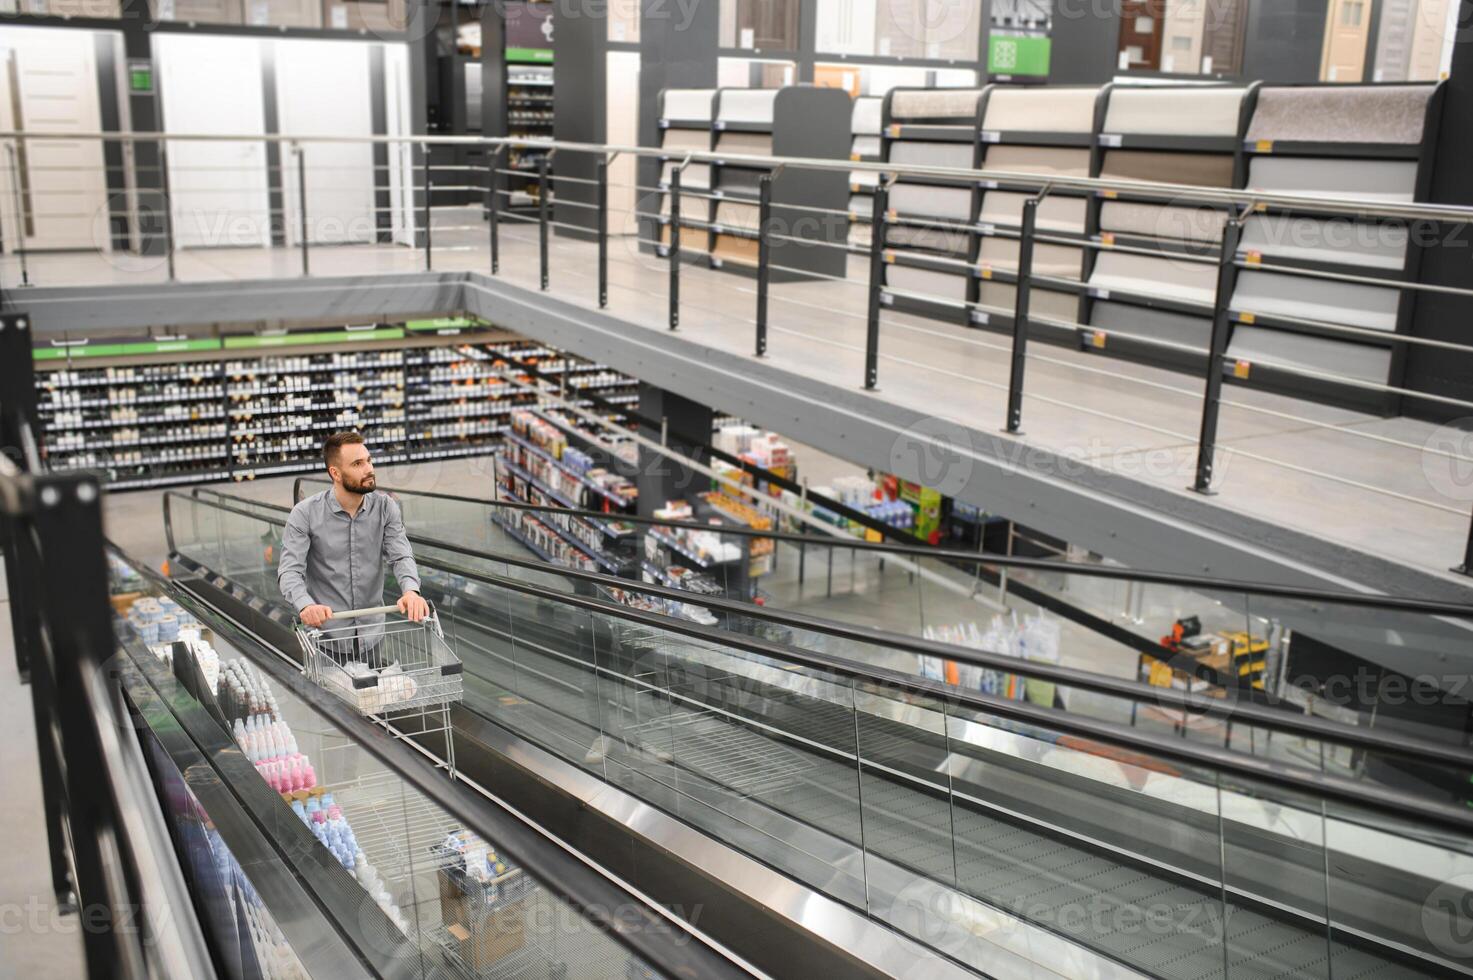 A man with a shopping cart on an escalator in a hardware store. photo